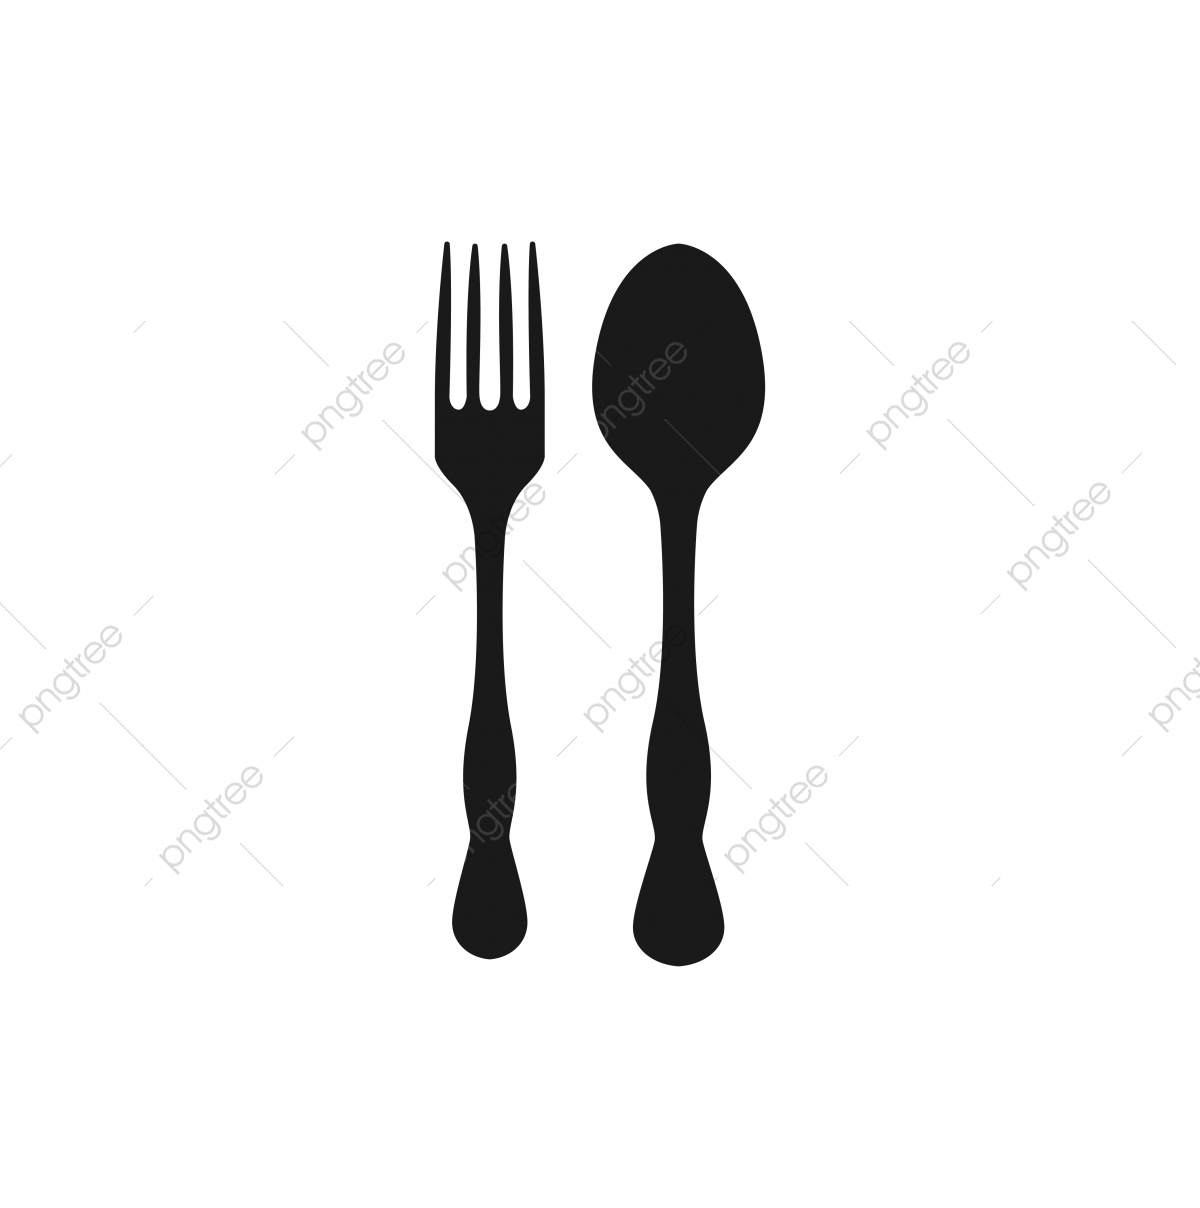 Illustration Of Spoon And Fork Graphic Design Template Vector, Fork.